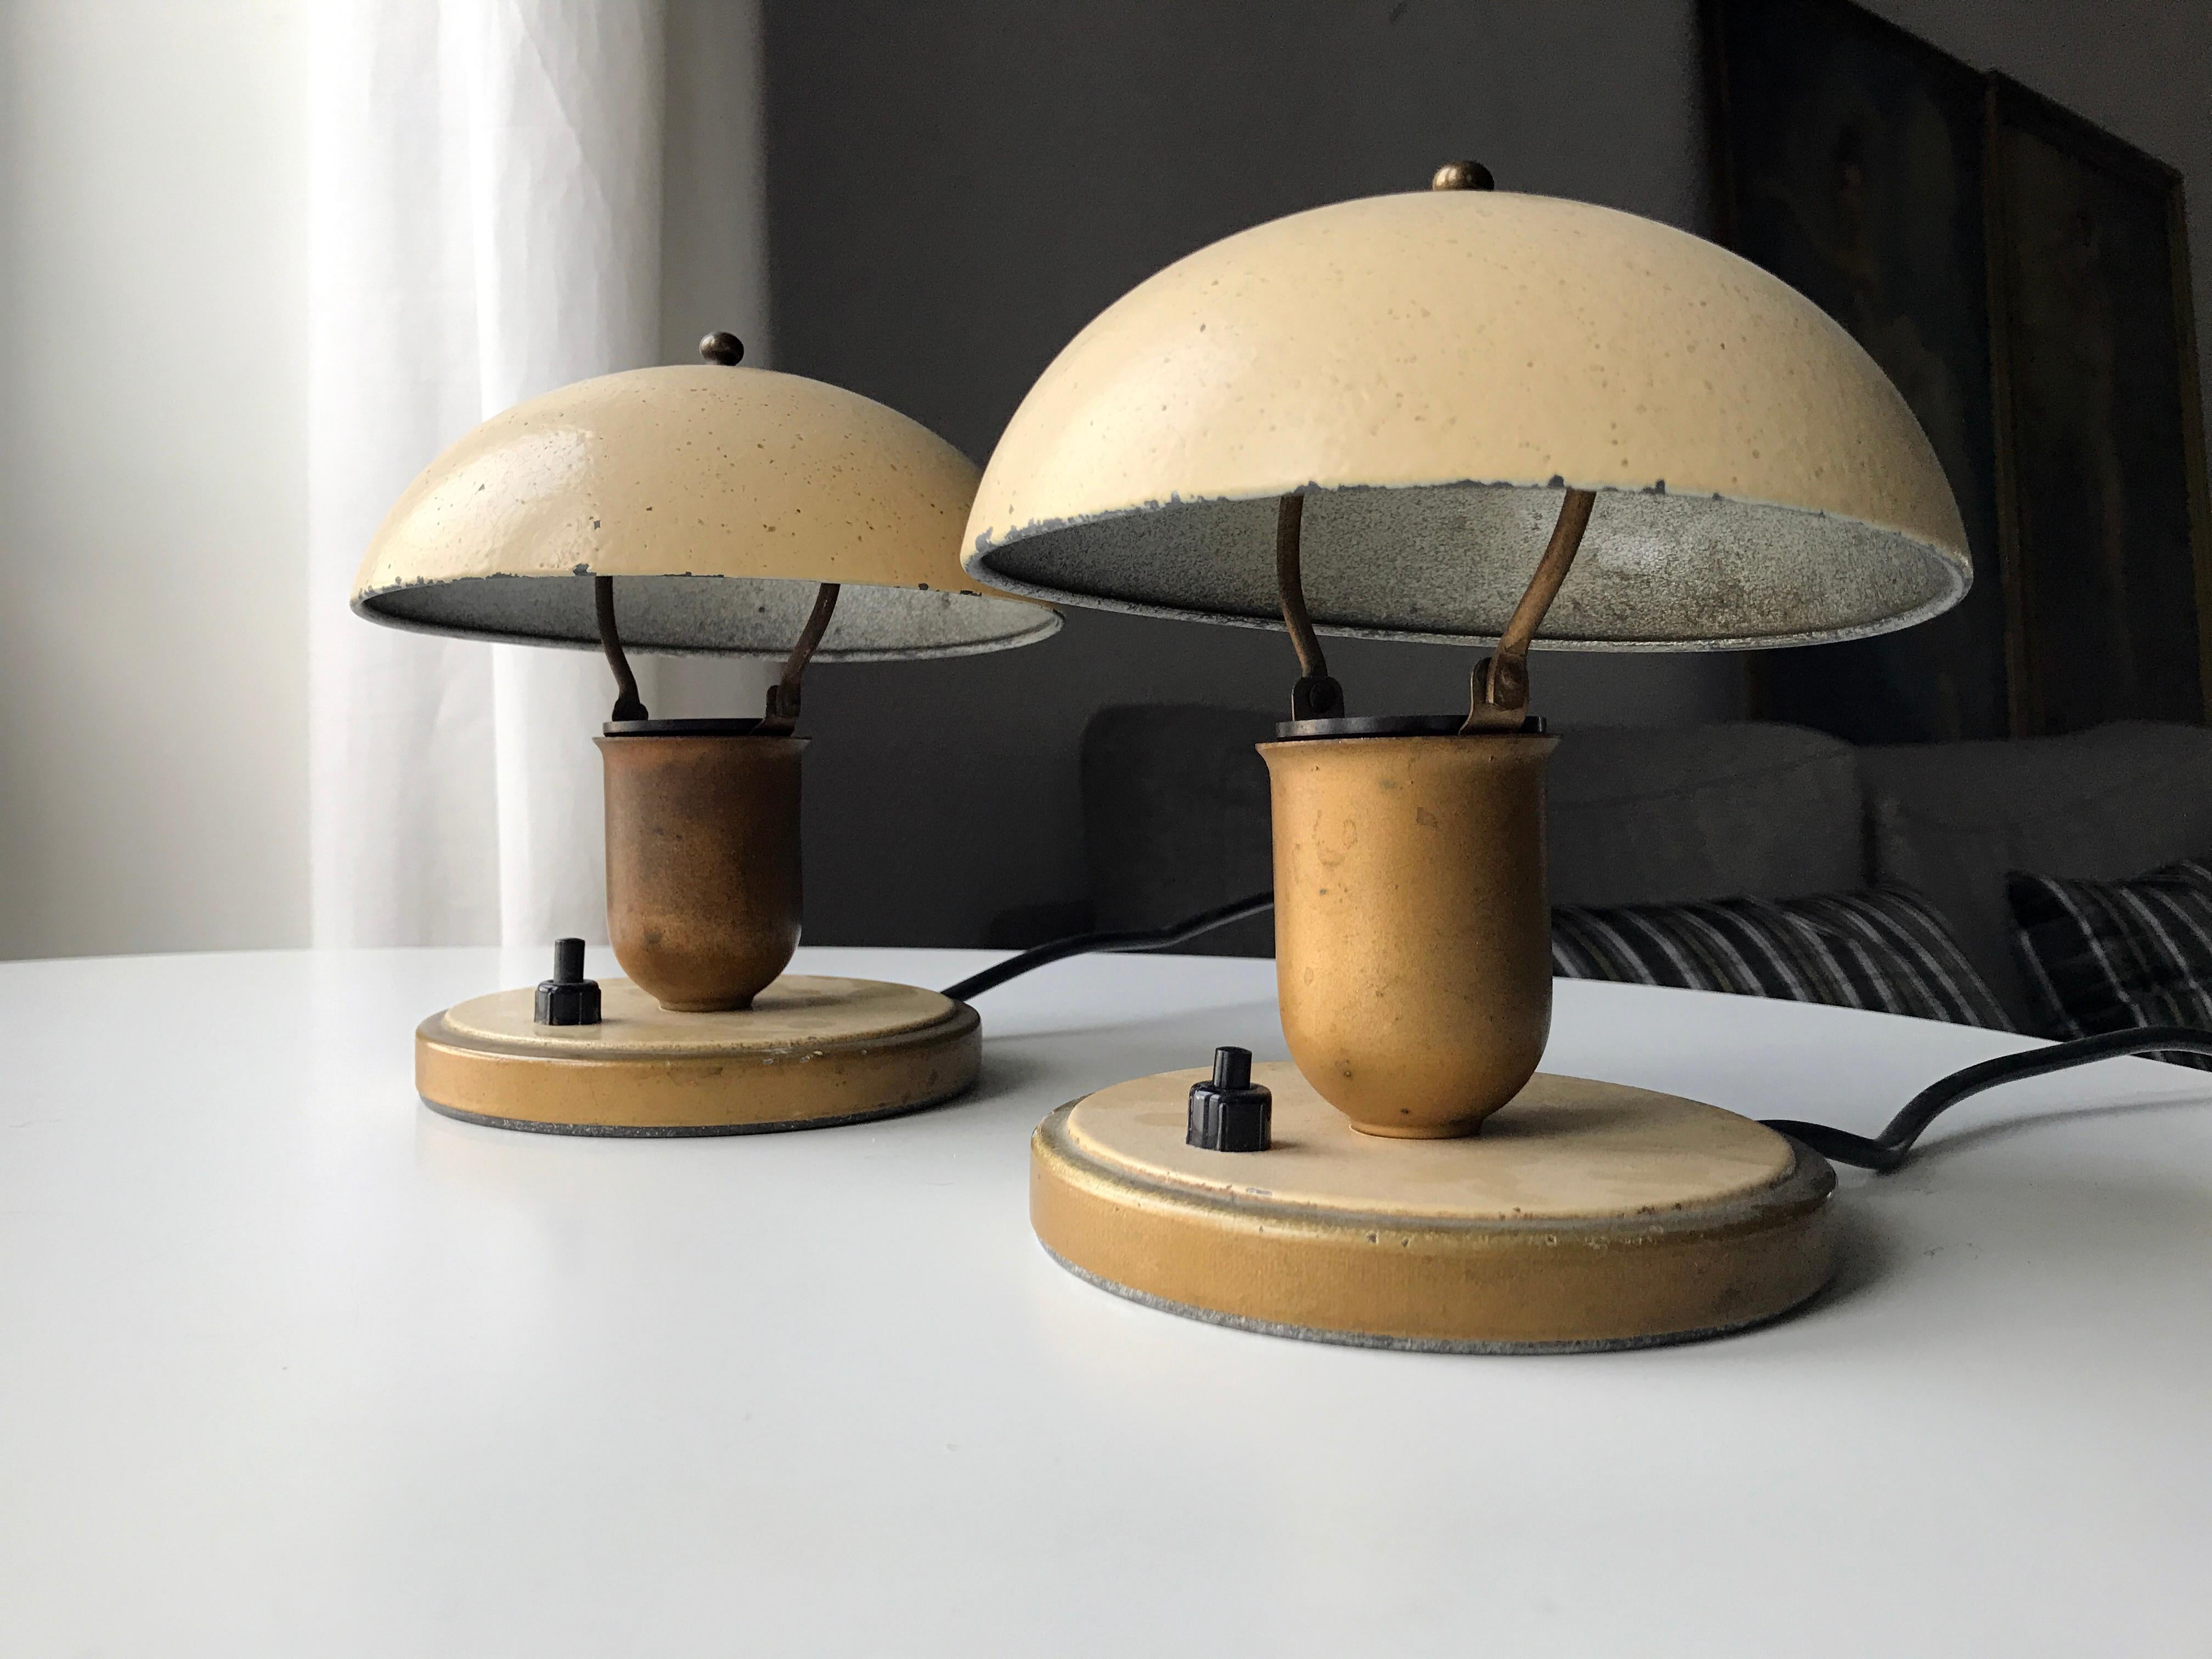 Pair of early art deco bedside table lamps presumably manufactured by Fog & Mørup in Denmark. Base and shade in metal with yellow coating. Shade can be tilted to both sides of the center. Can be placed on table or mounted on wall. Rewired but kept